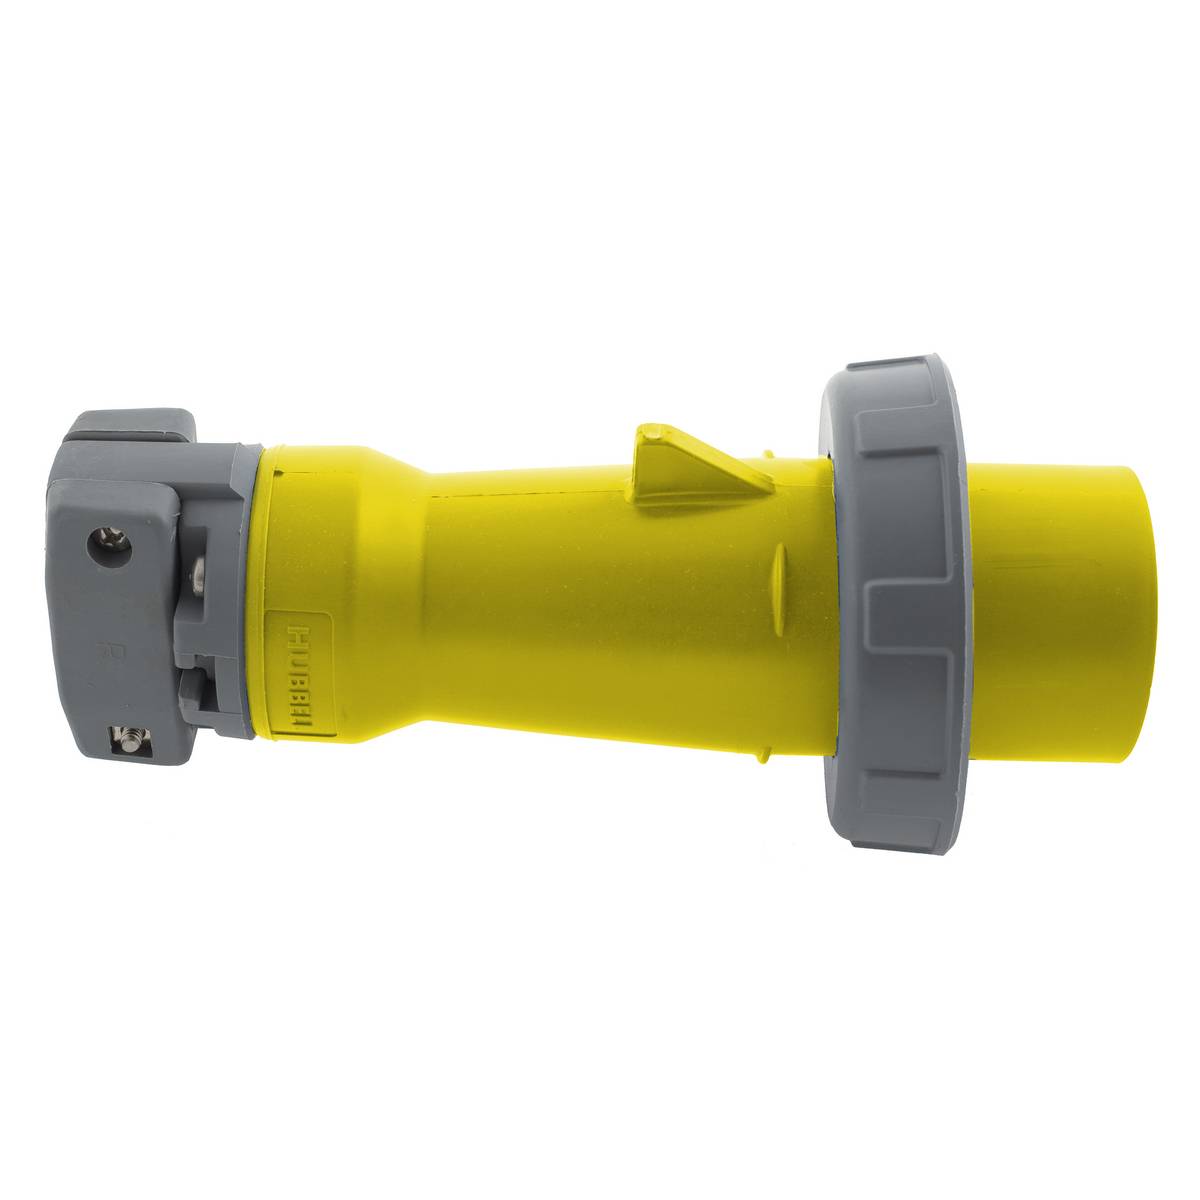 Wiring Device-Kellems HBL330P4W 1-Phase Heavy Duty Male Standard Watertight Cord Mount Pin and Sleeve Plug, 125 VAC, 30 A, 2 Poles, 3 Wires, Yellow